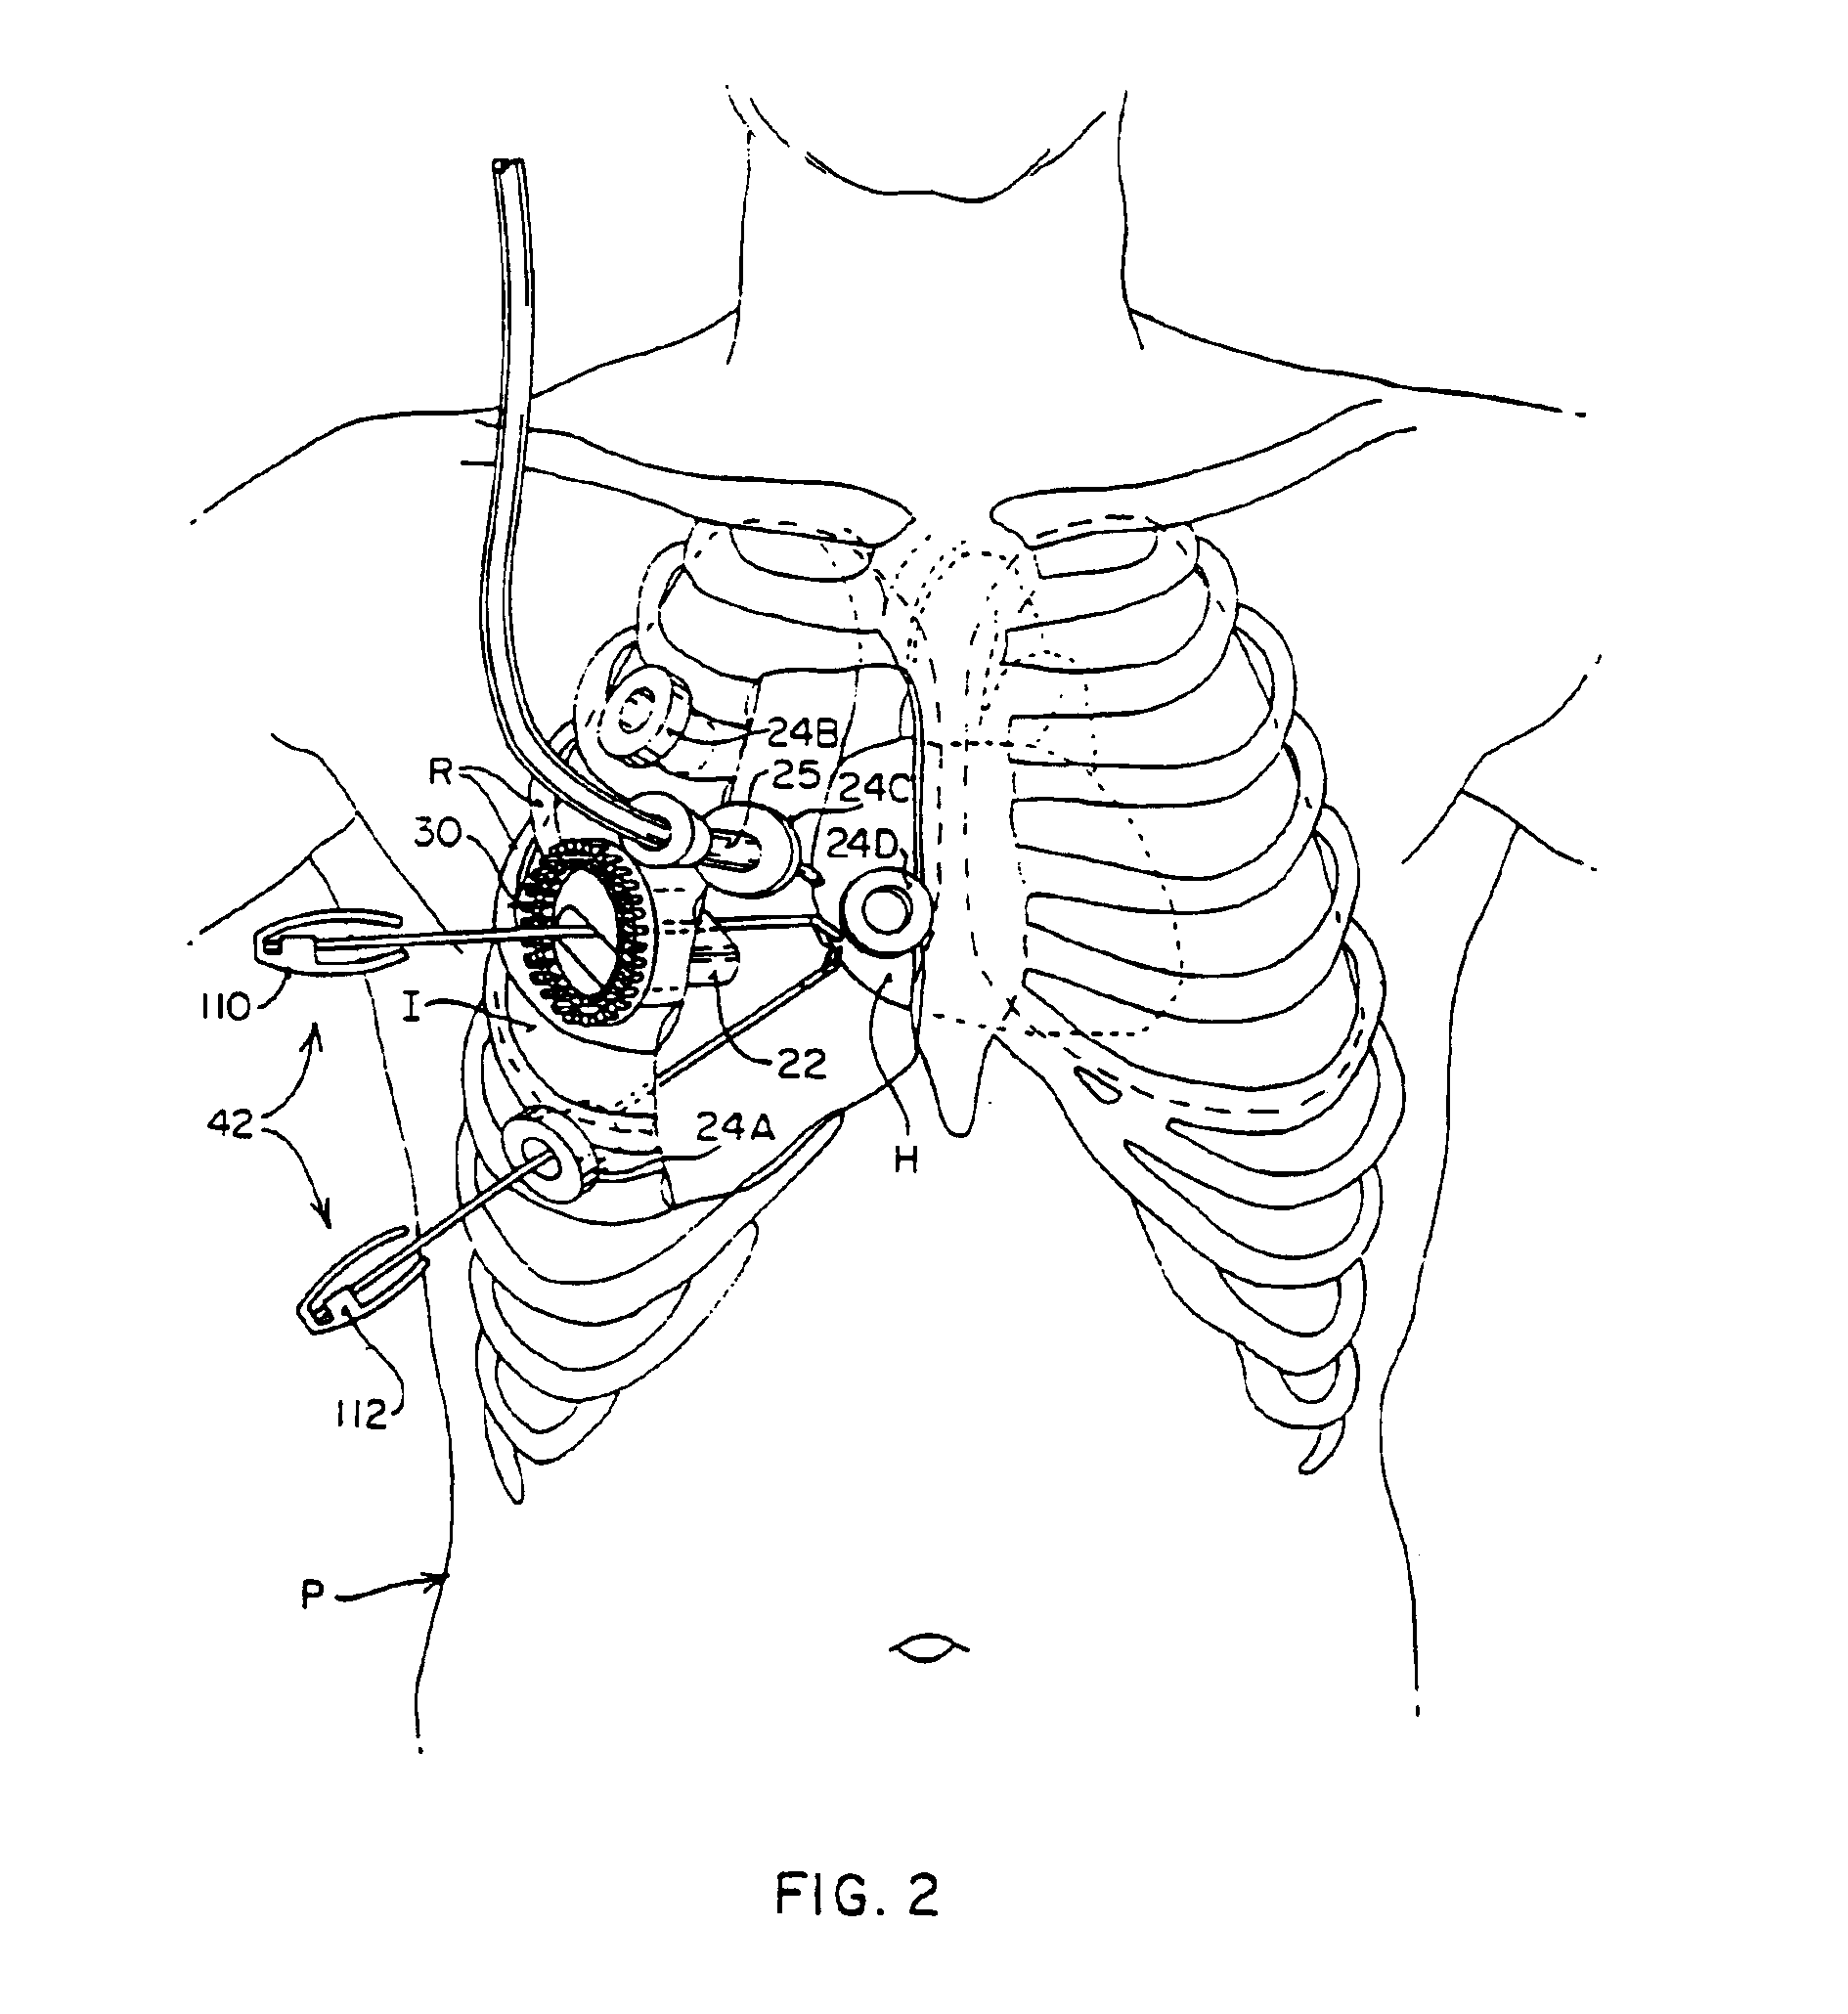 Devices and methods for intracardiac procedures